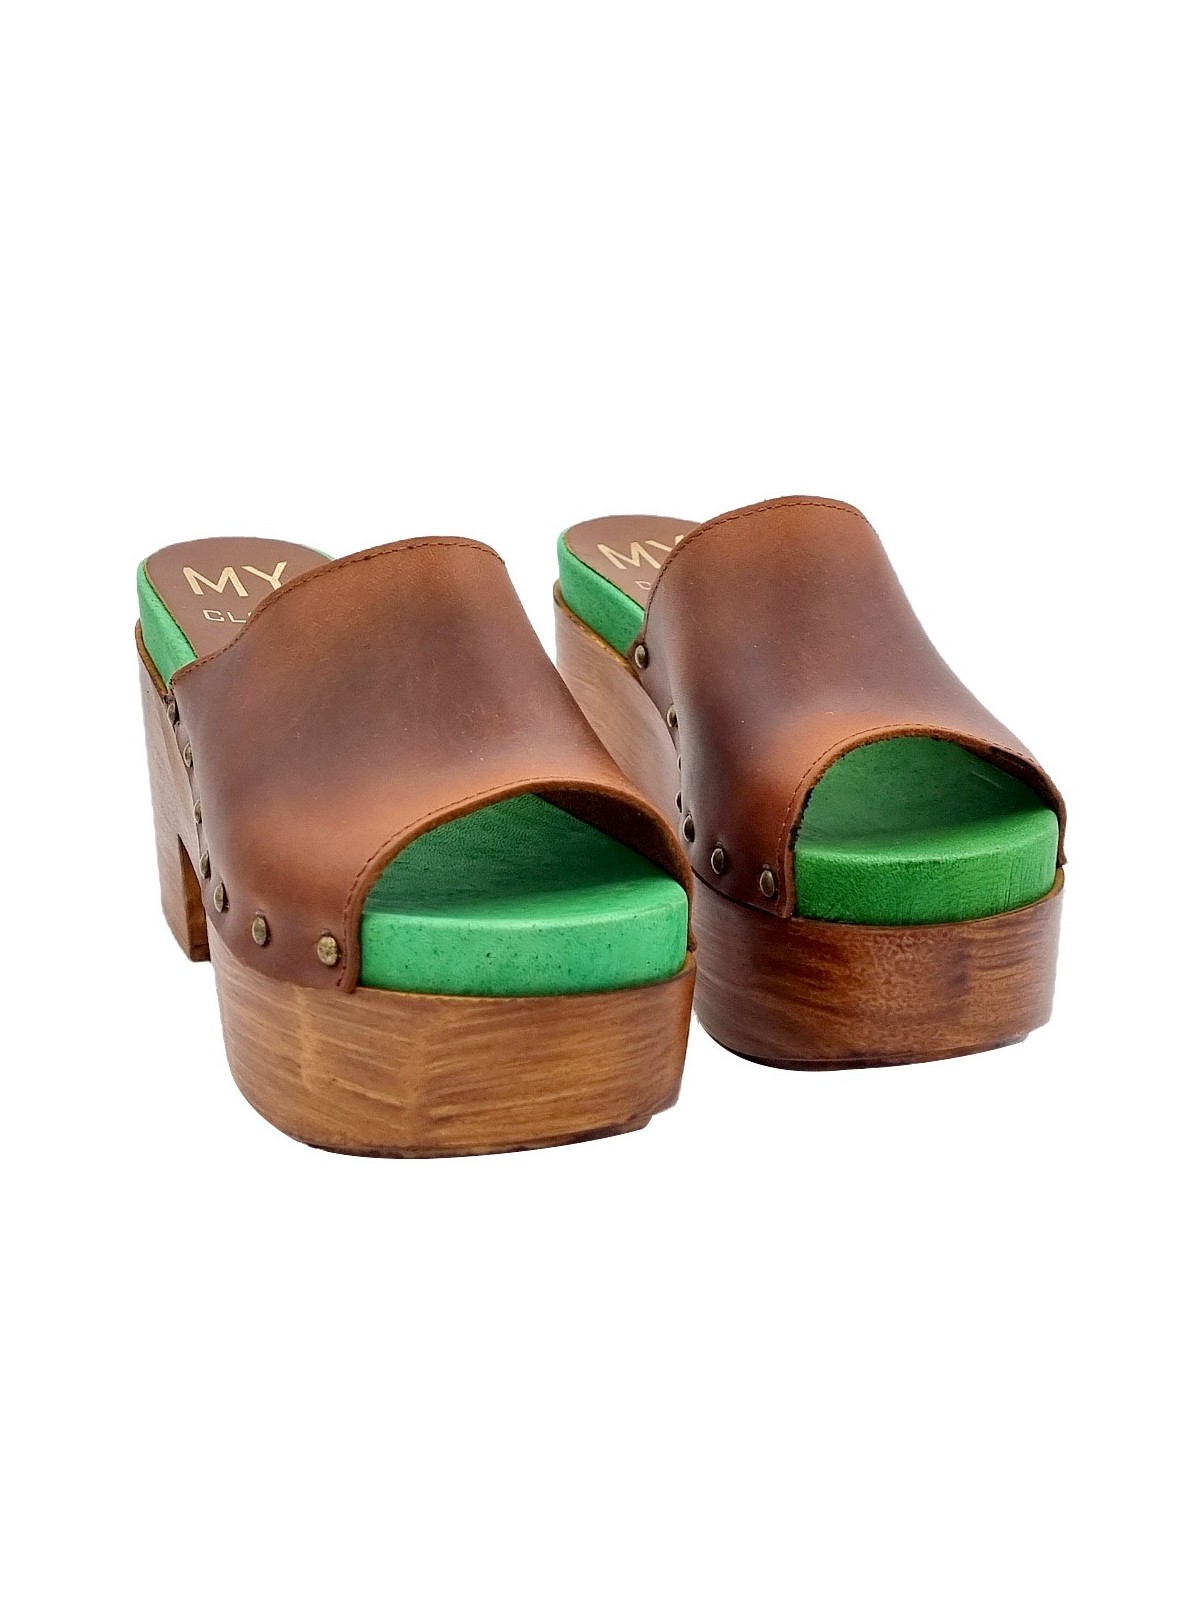 LEATHER CLOGS IN BROWN LEATHER COLOR 9.5 HEEL